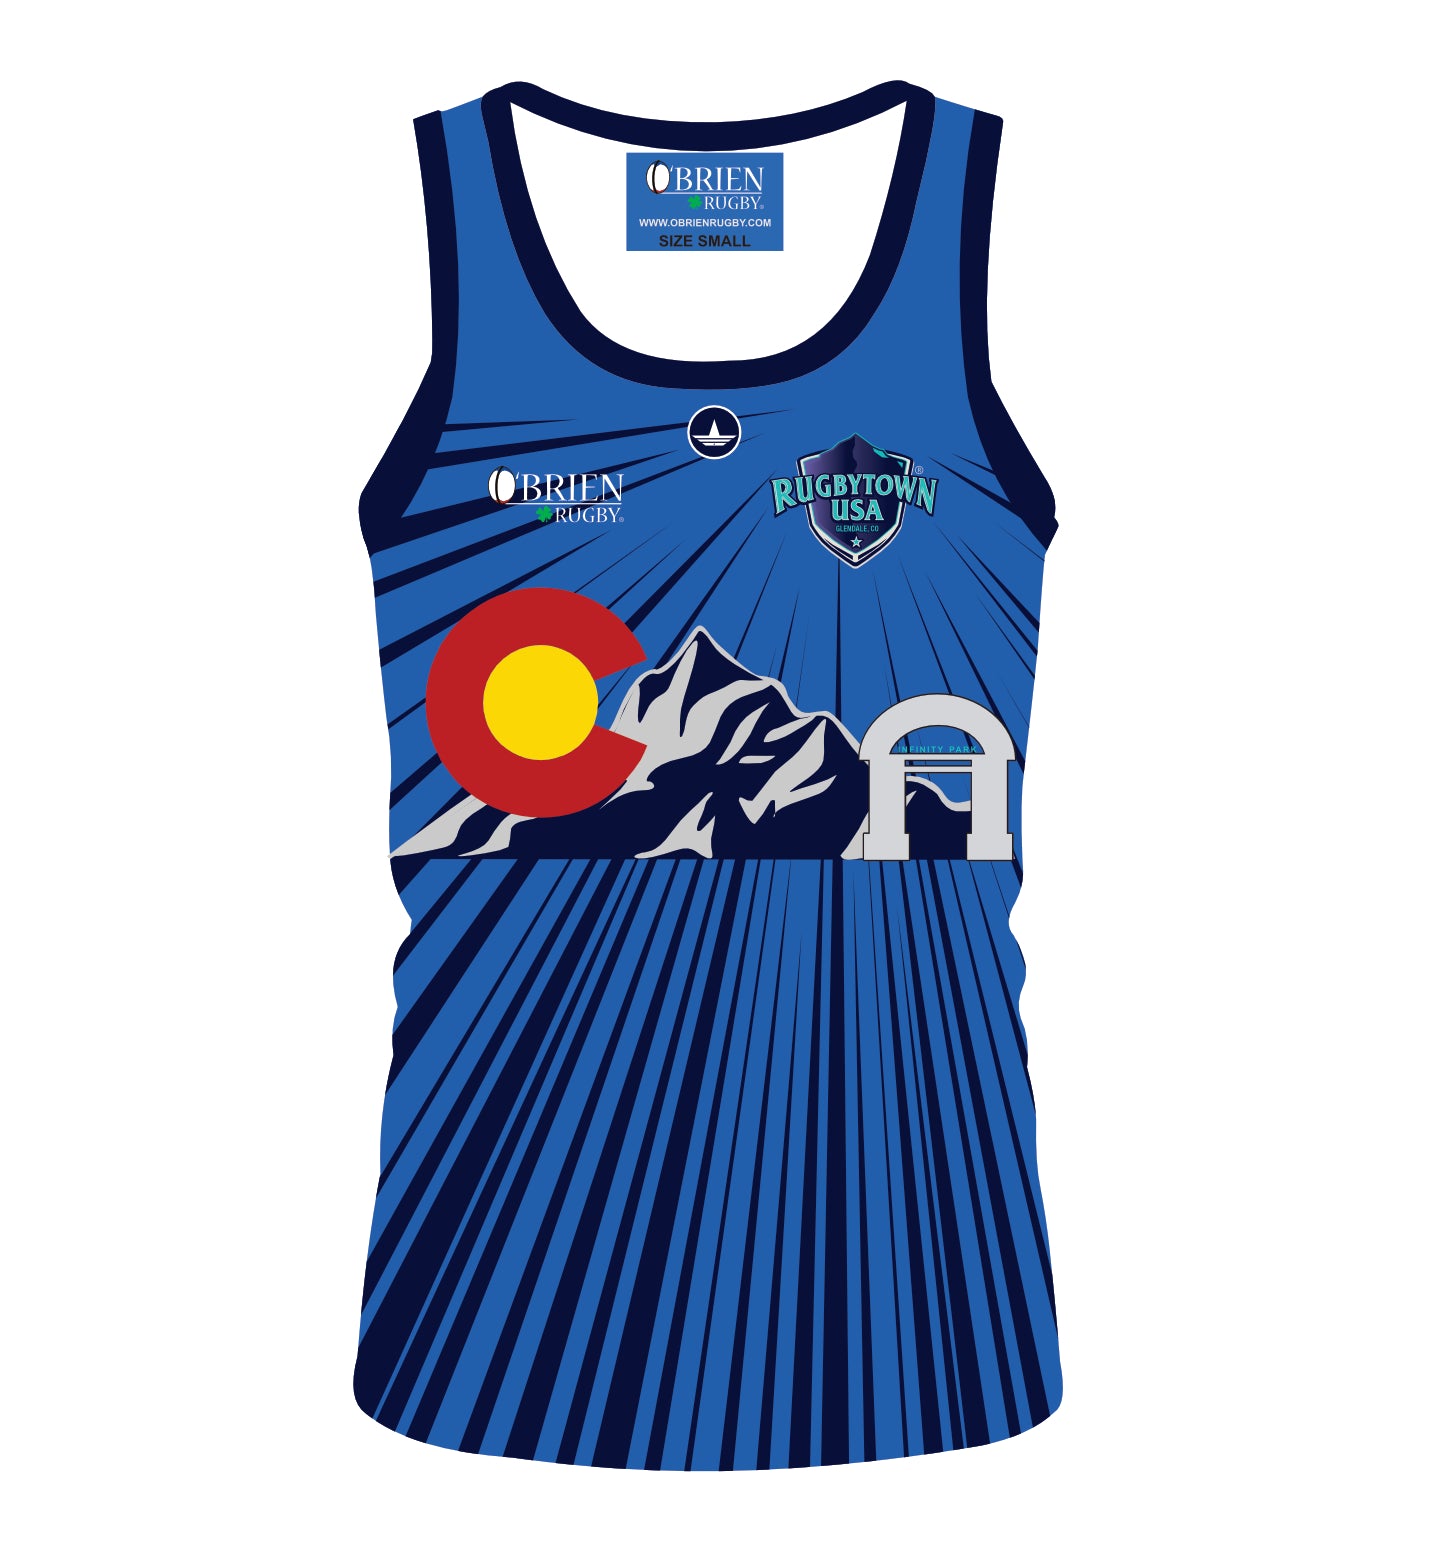 RUGBYTOWN USA PERFORMANCE SINGLET